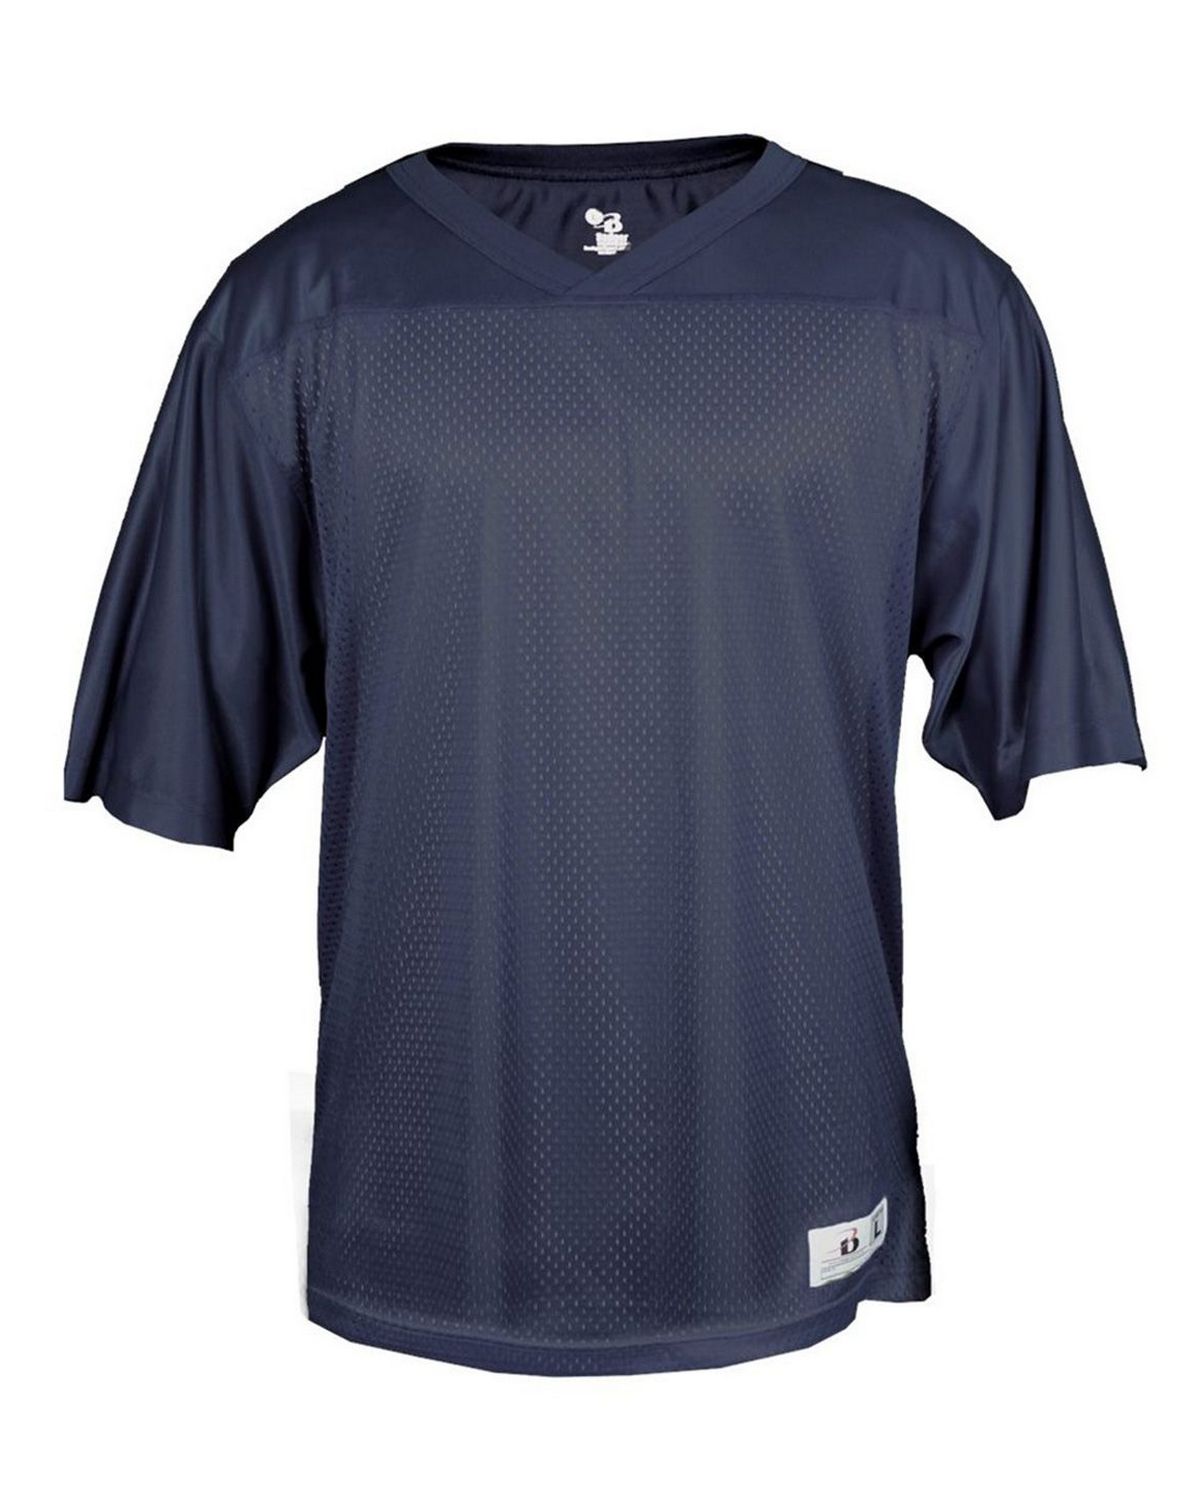 Badger 8565 Mesh Fan Jersey - Free Shipping Available